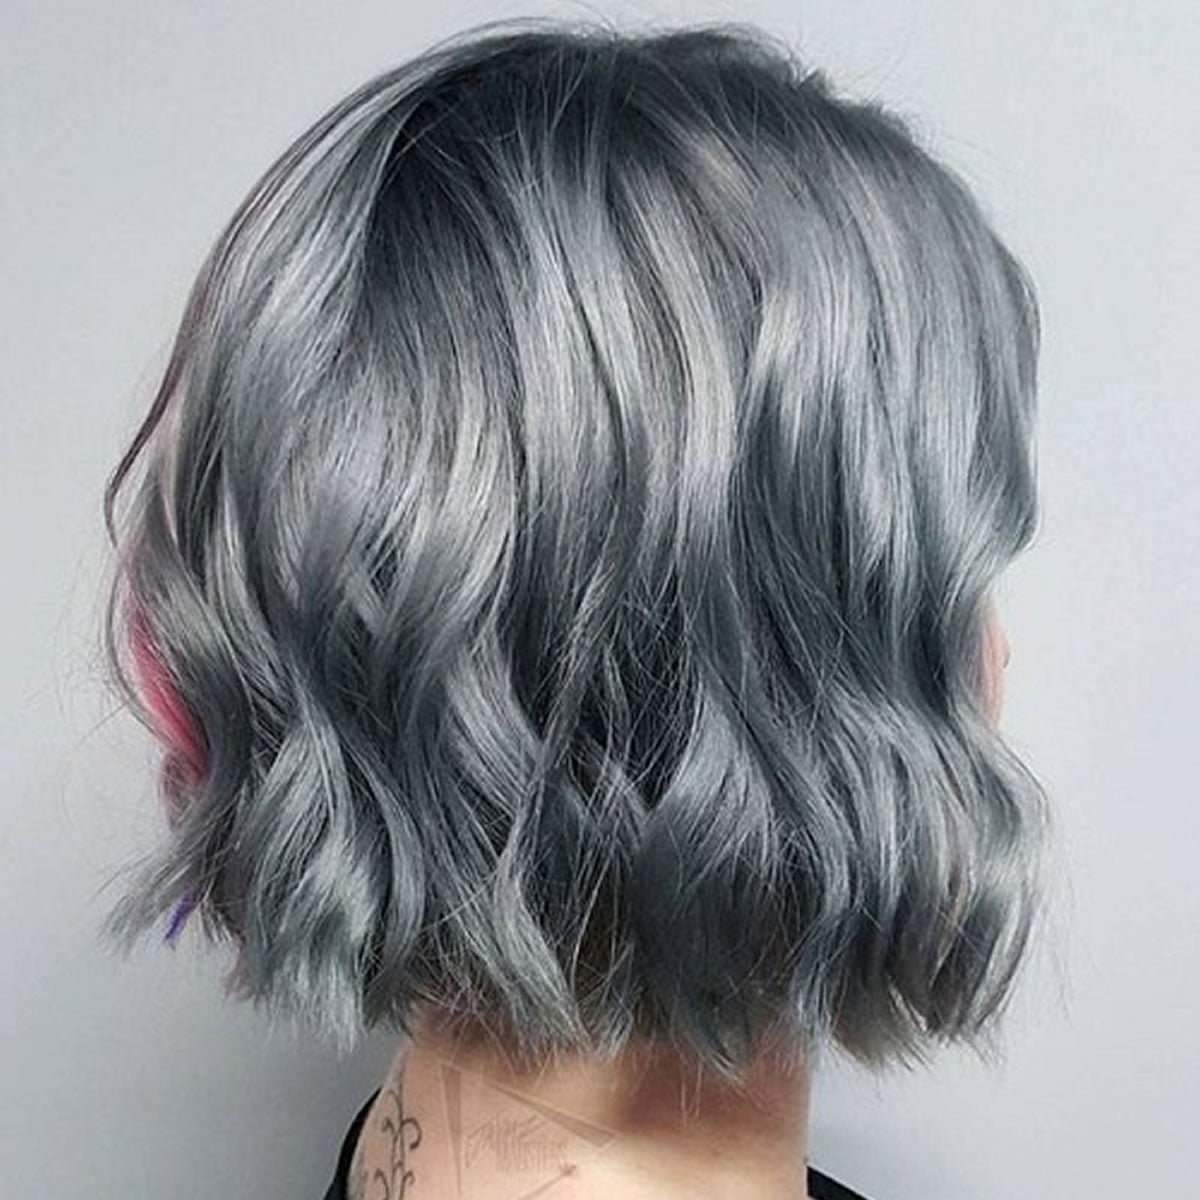 grey hair trend – 20 glamorous hairstyles for women 2018 – page 4